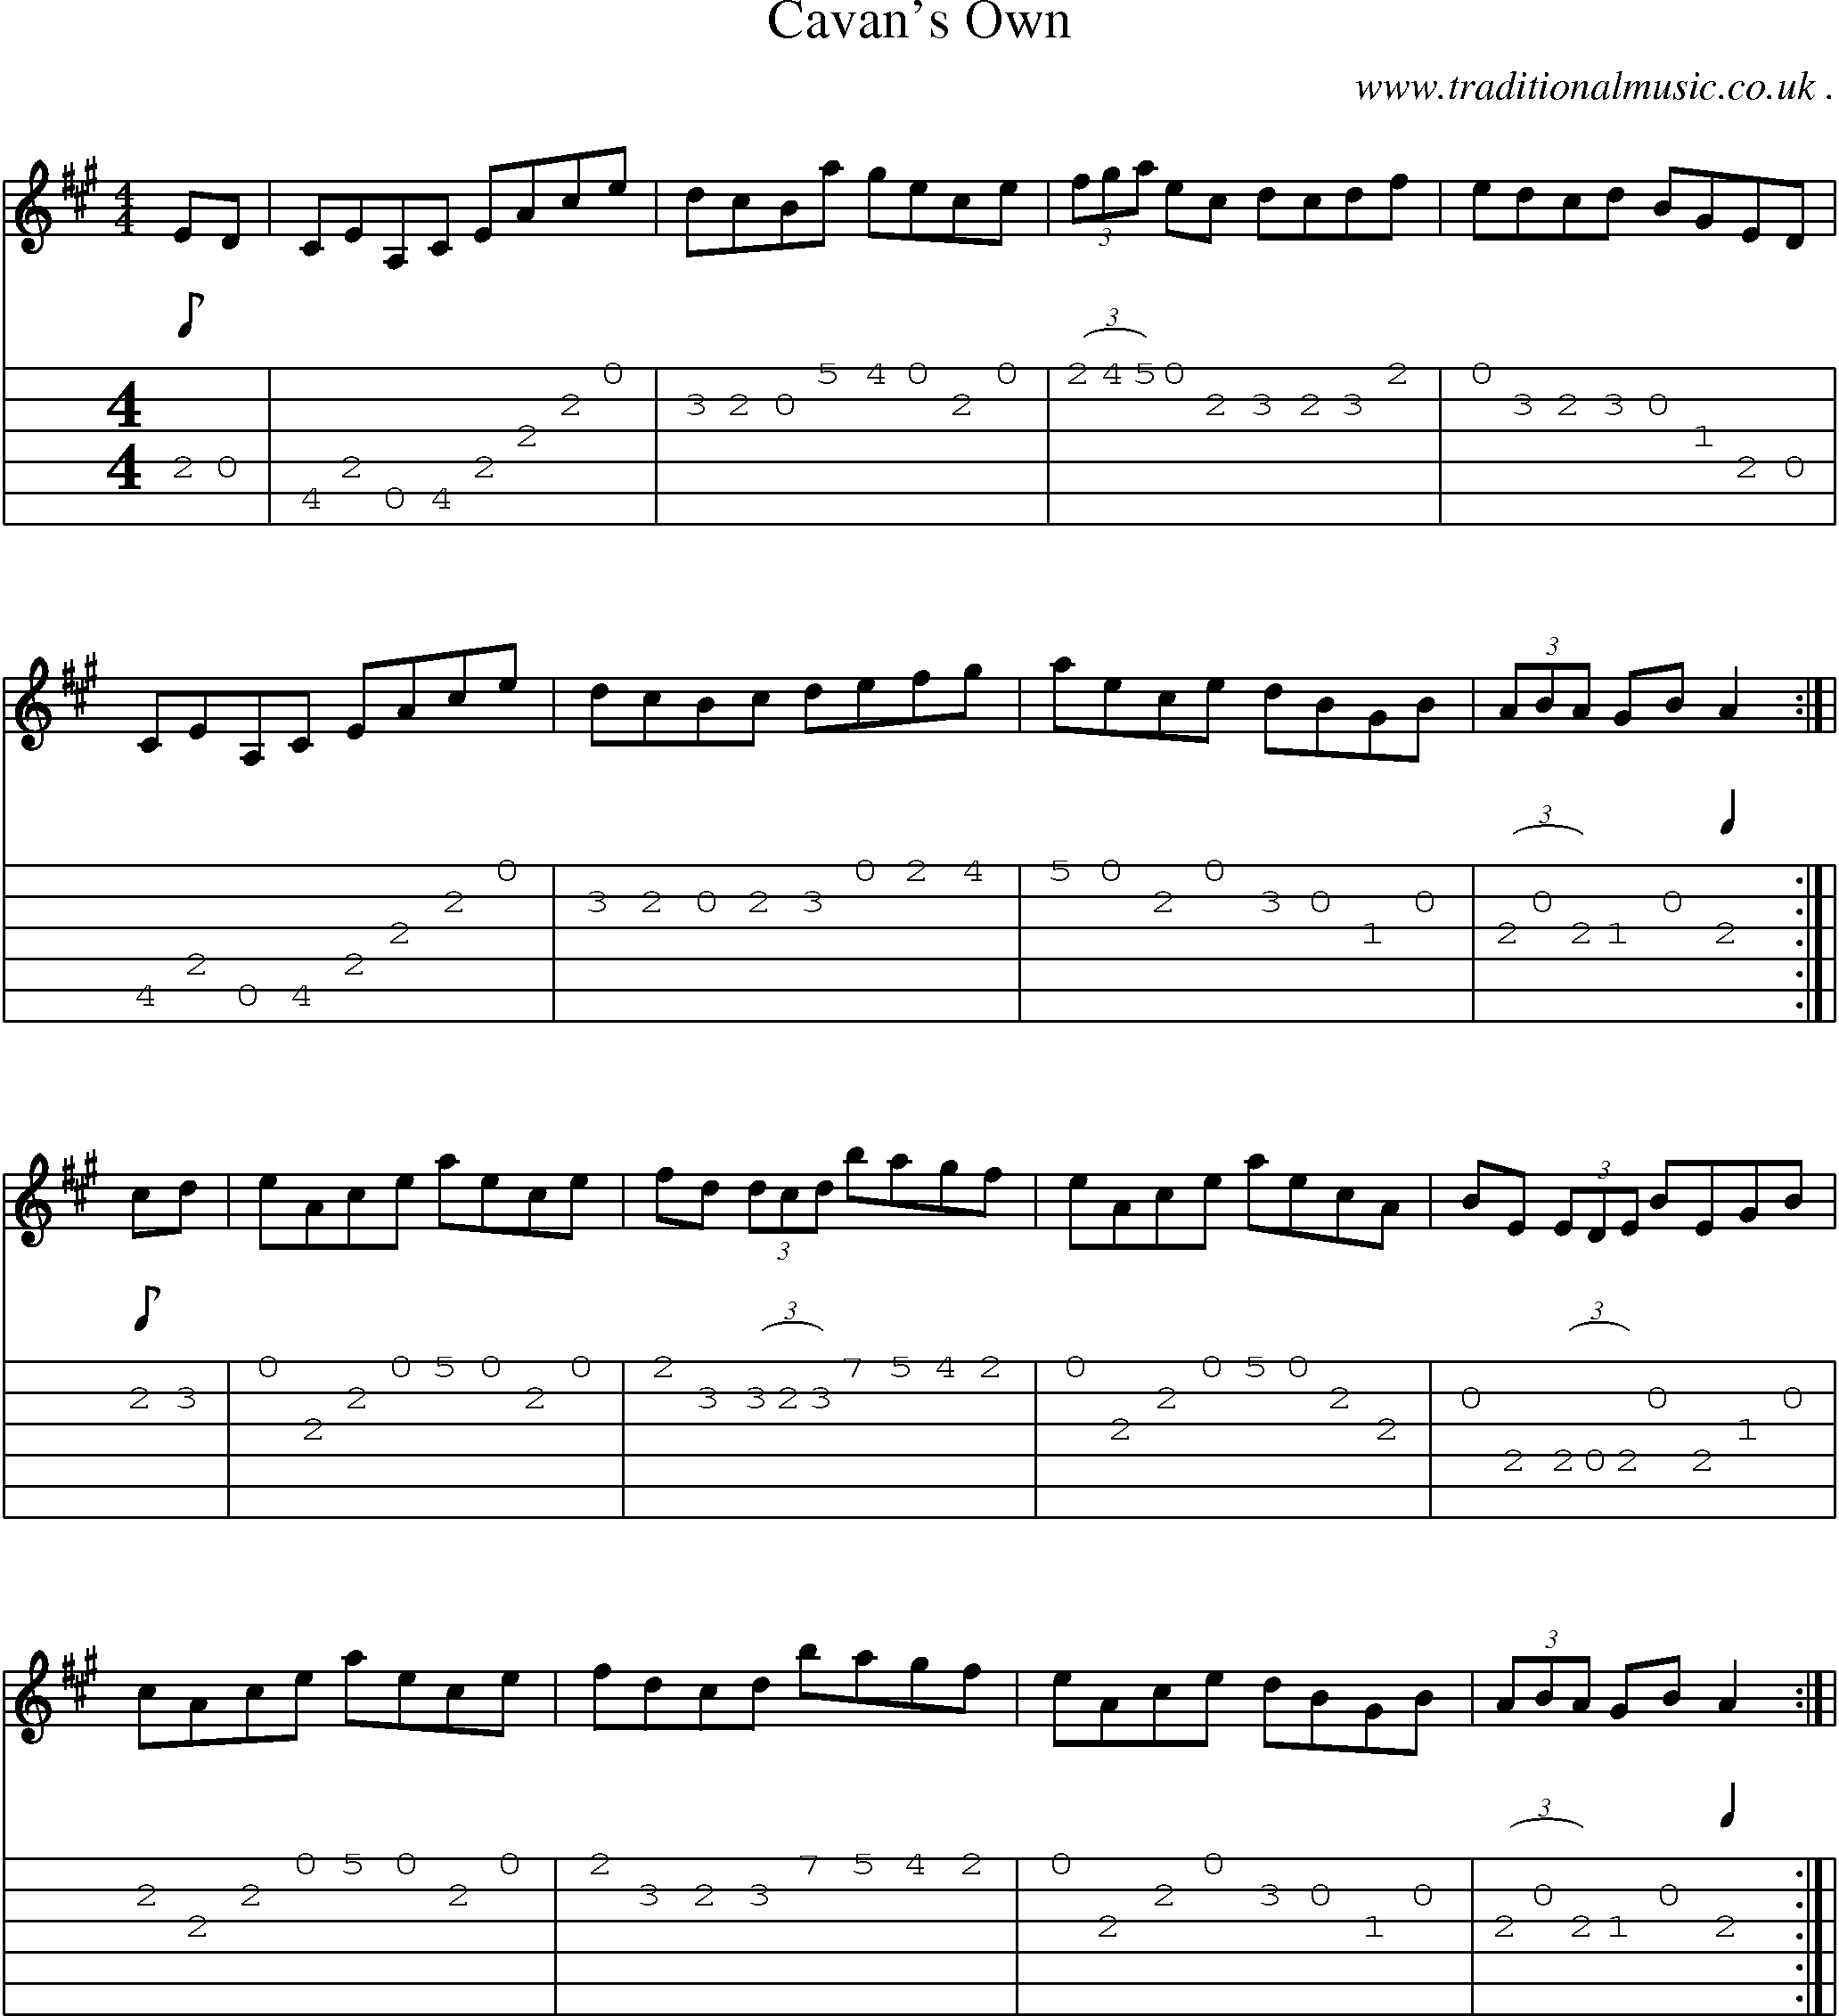 Sheet-Music and Guitar Tabs for Cavans Own